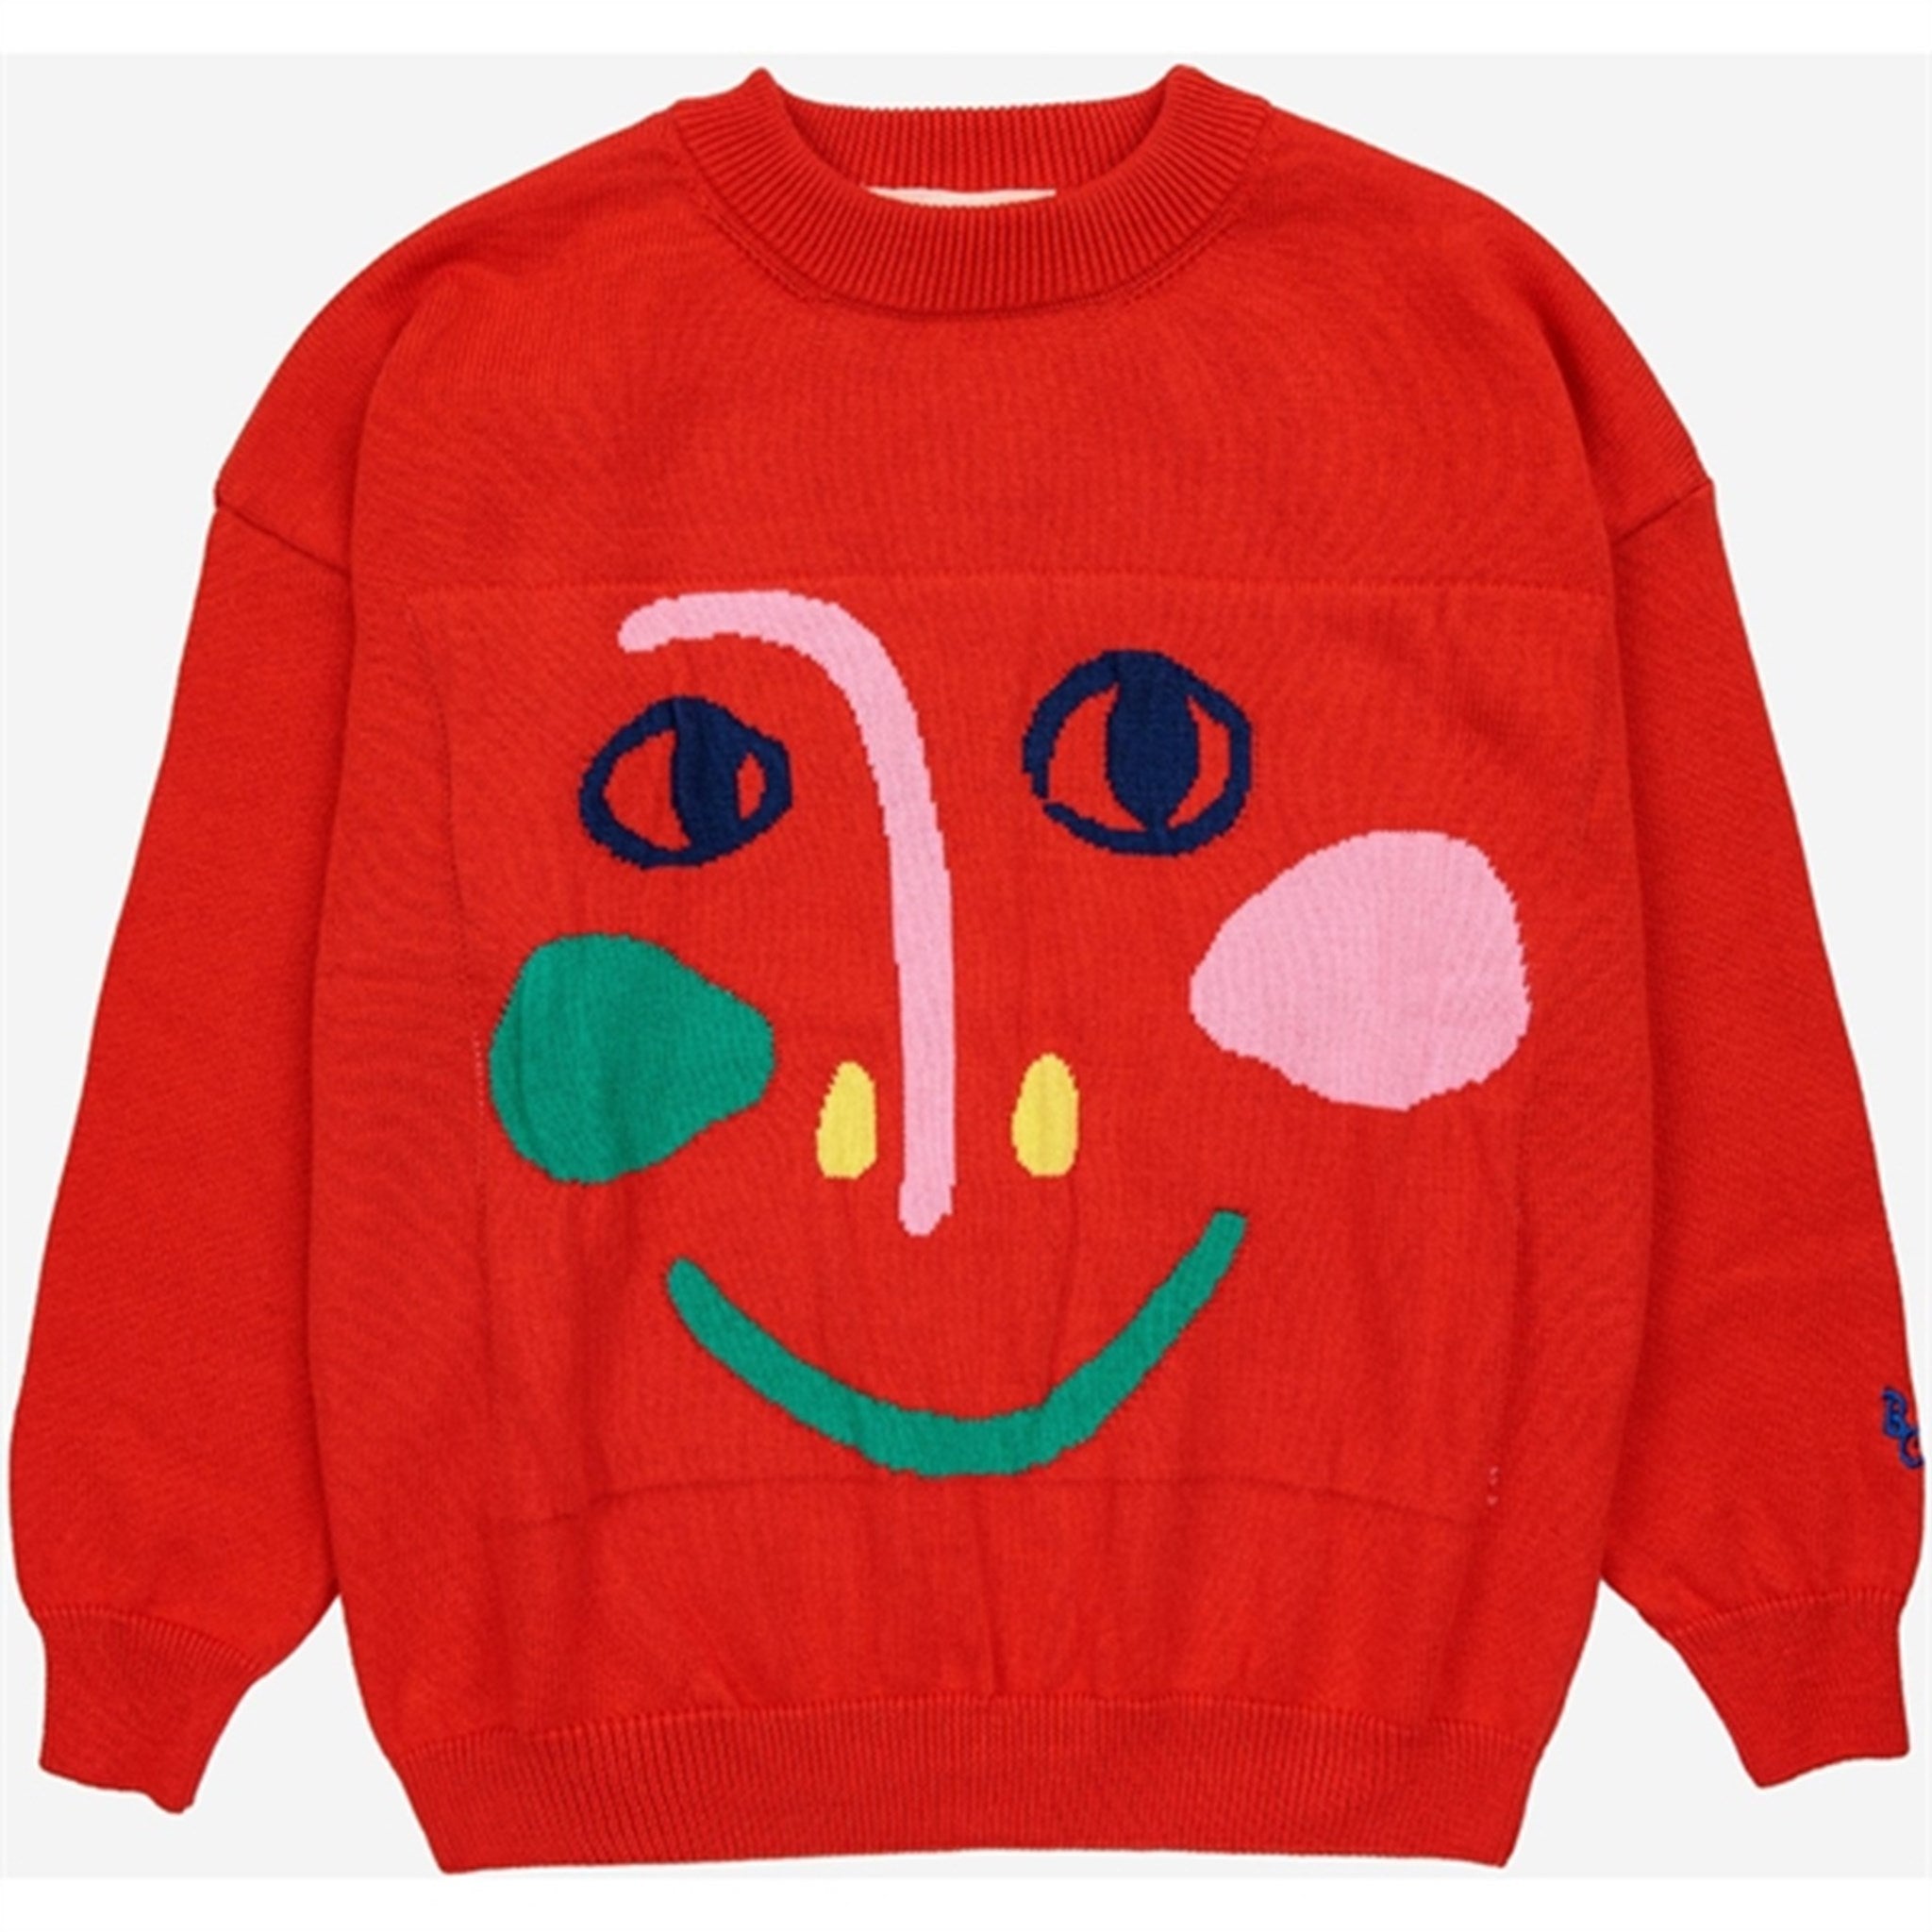 Bobo Choses Smiling Mask Sweater Round Neck Red